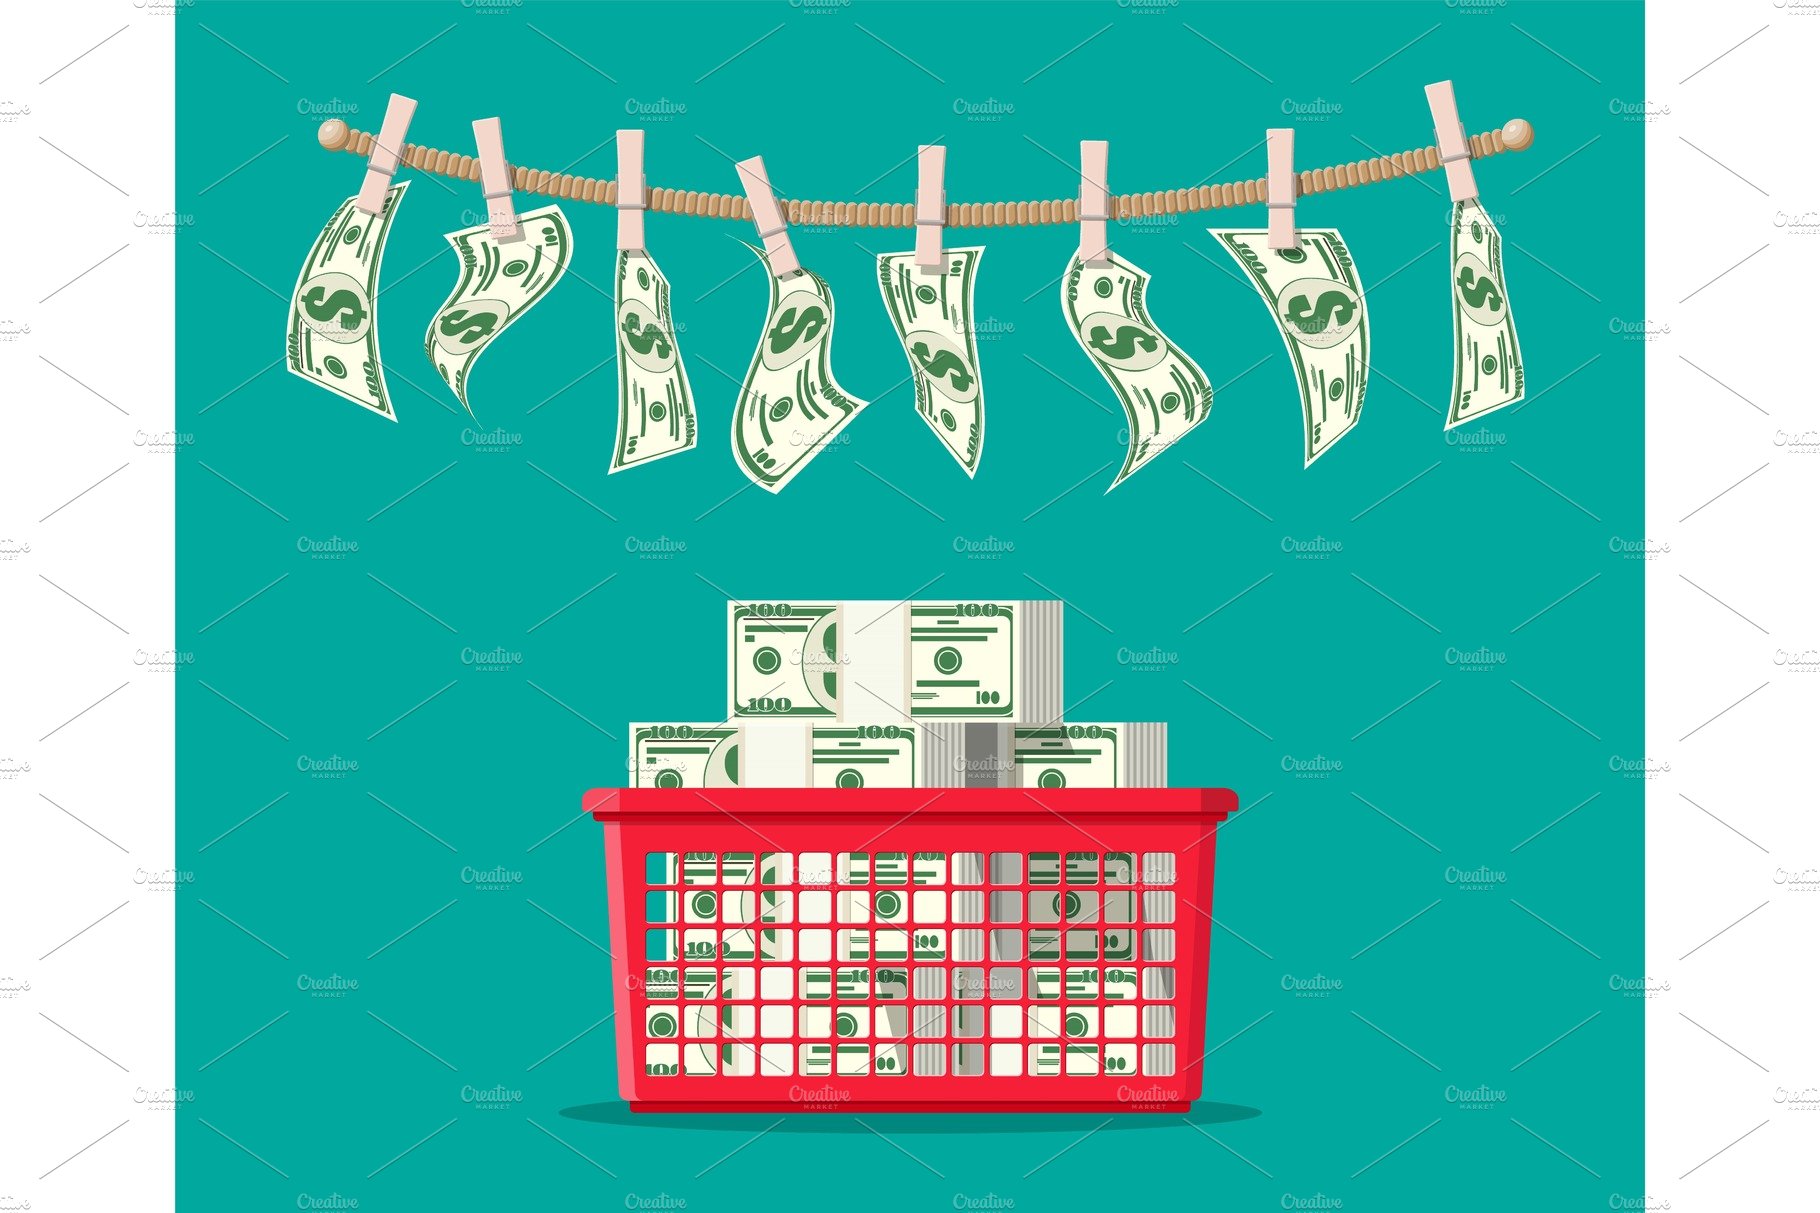 A red basket filled with money hanging from a clothes line.